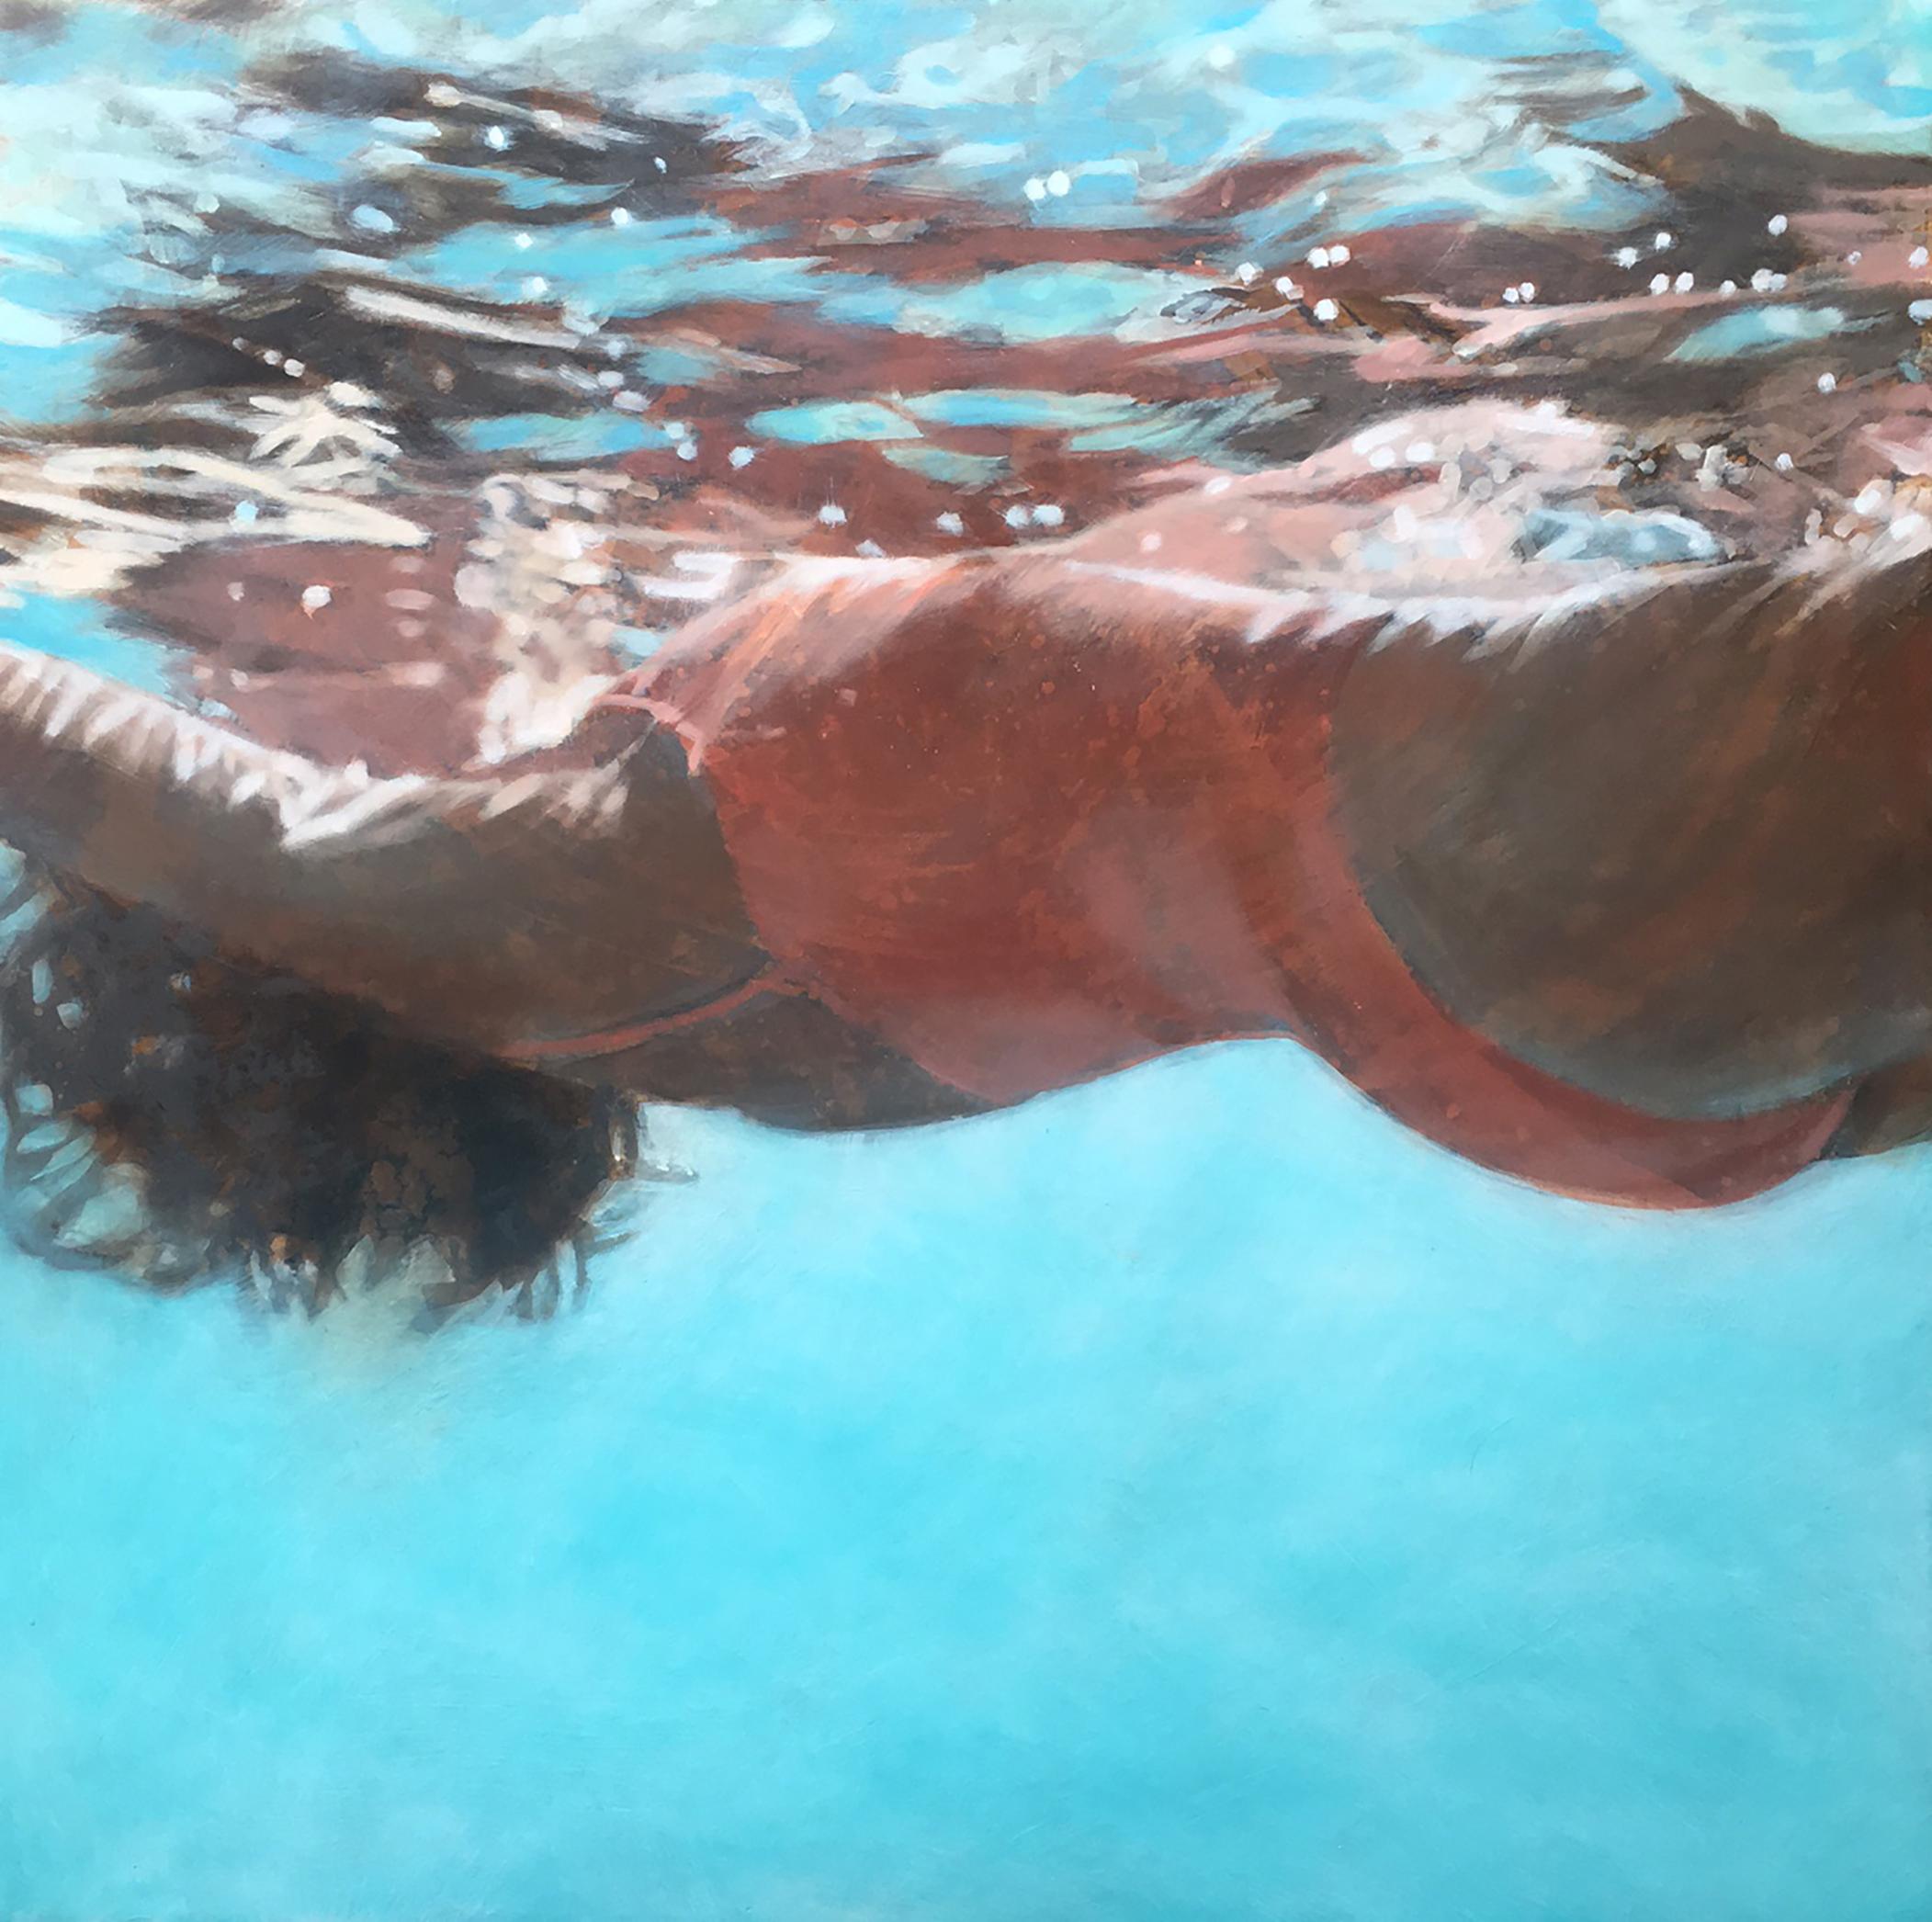 Carol Bennett Figurative Painting - "Salmon-Big and Grounded" oil painting of woman in orange floating in blue pool